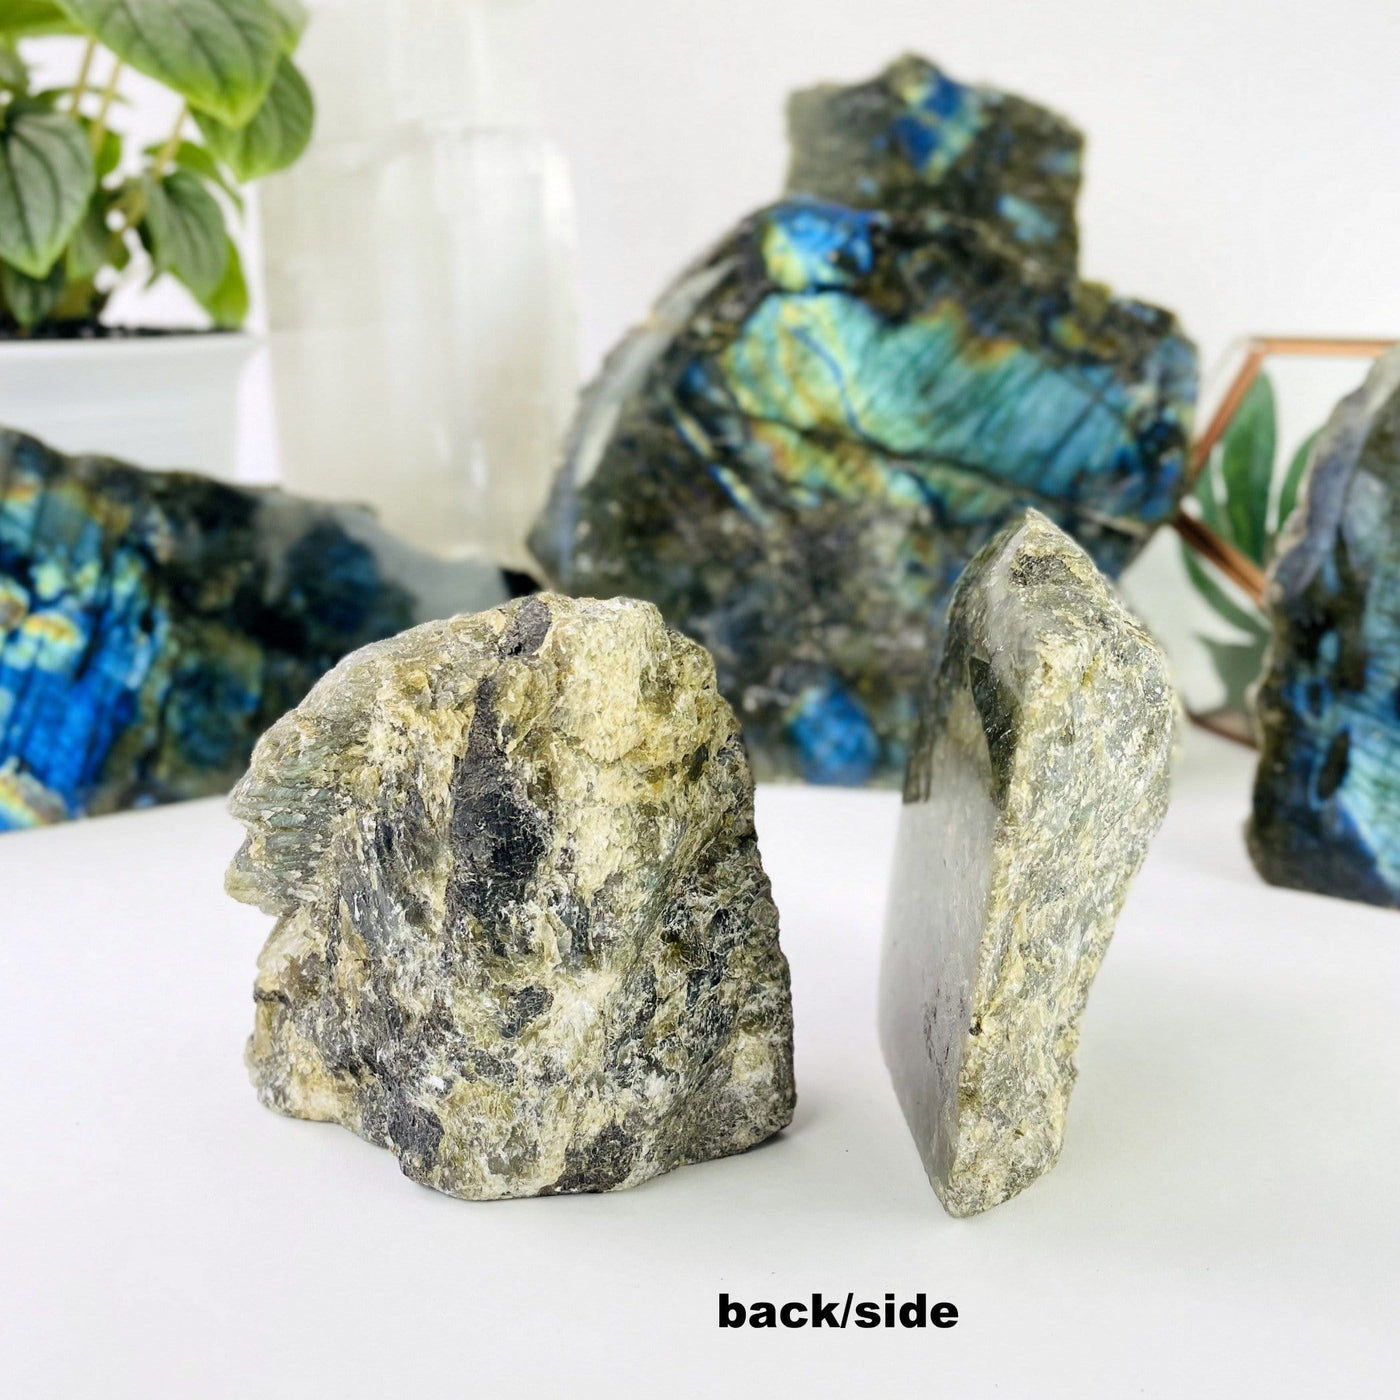 back and side view of labradorite bases to show non polished sides